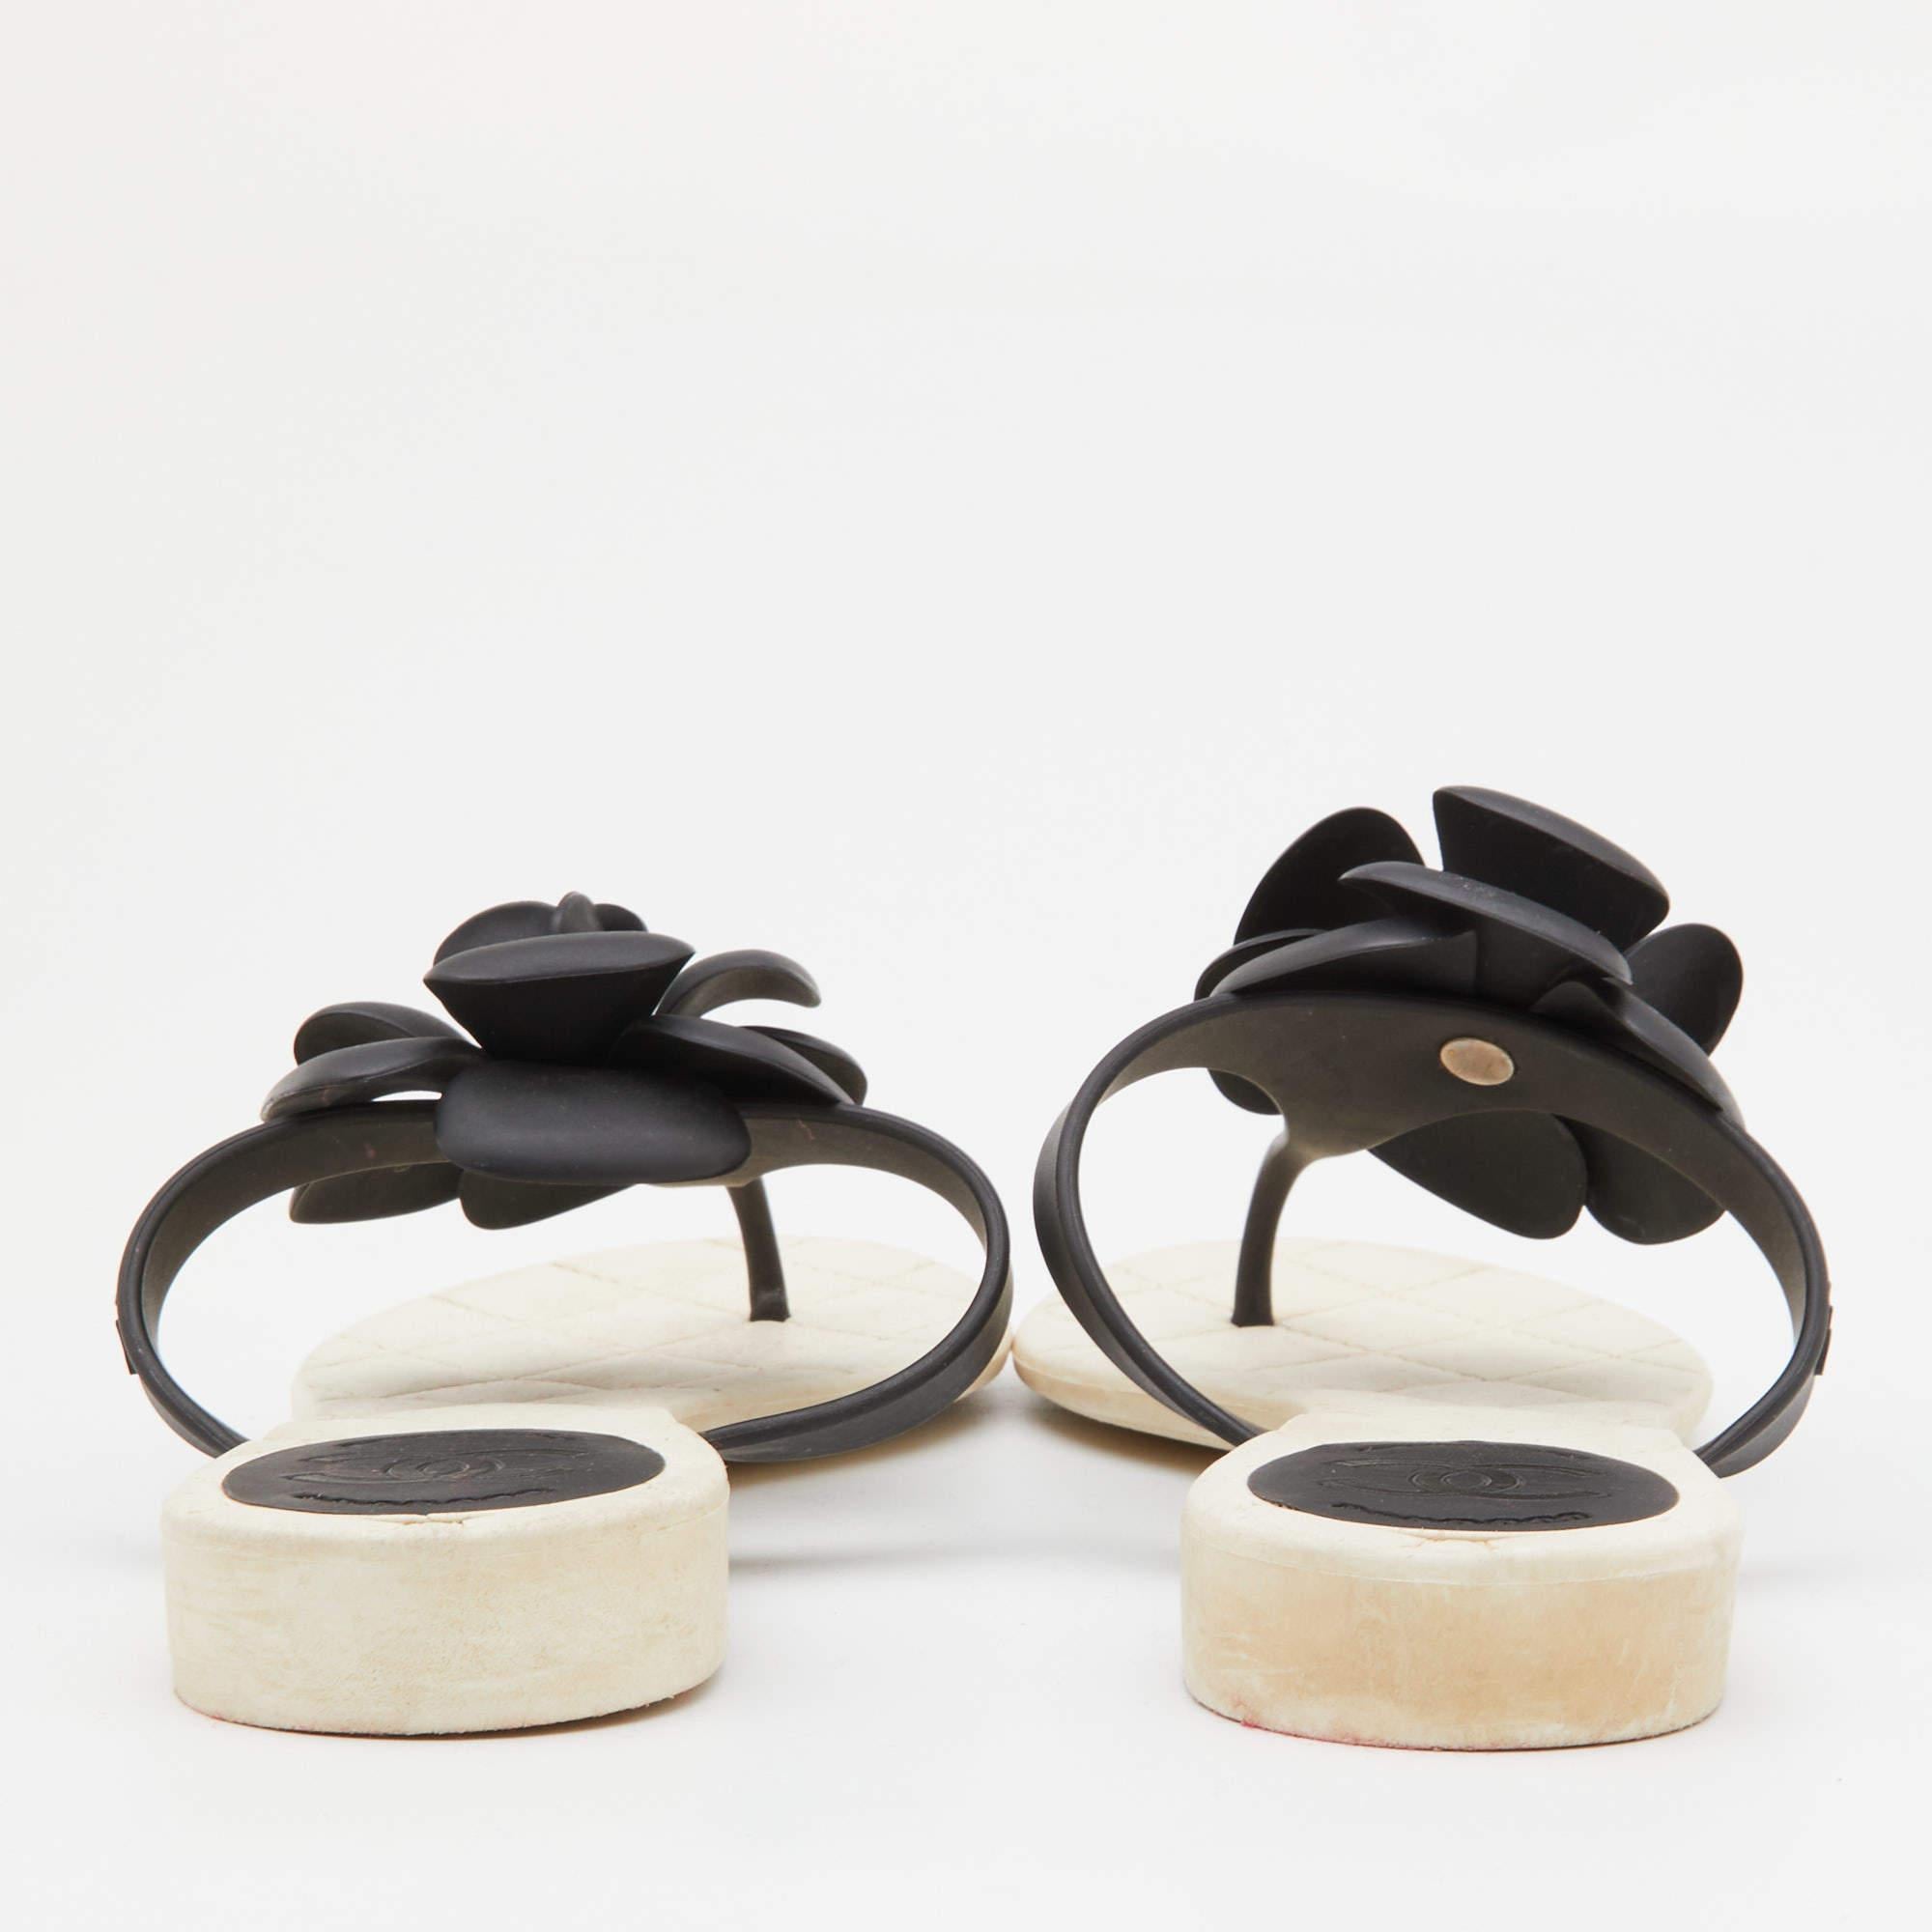 This summer, give an edge to your outfit by stepping out in these thong sandals from the house of Chanel. Crafted from rubber, they feature a CC-adorned Camellia flower on the front.

